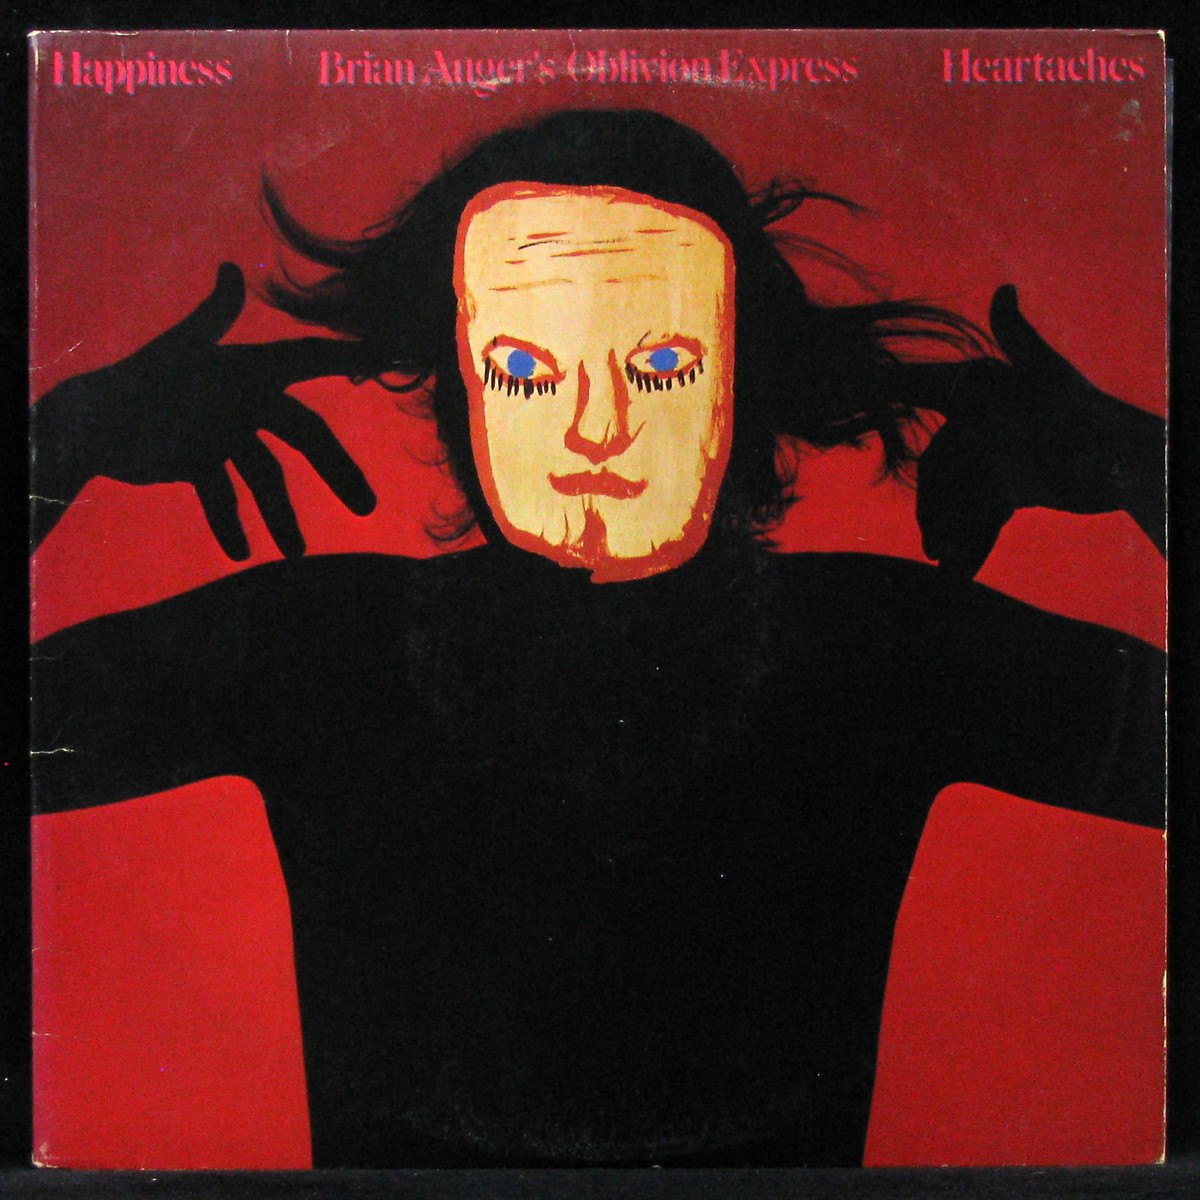 LP Brian Auger's Oblivion Express — Happiness Heartaches фото